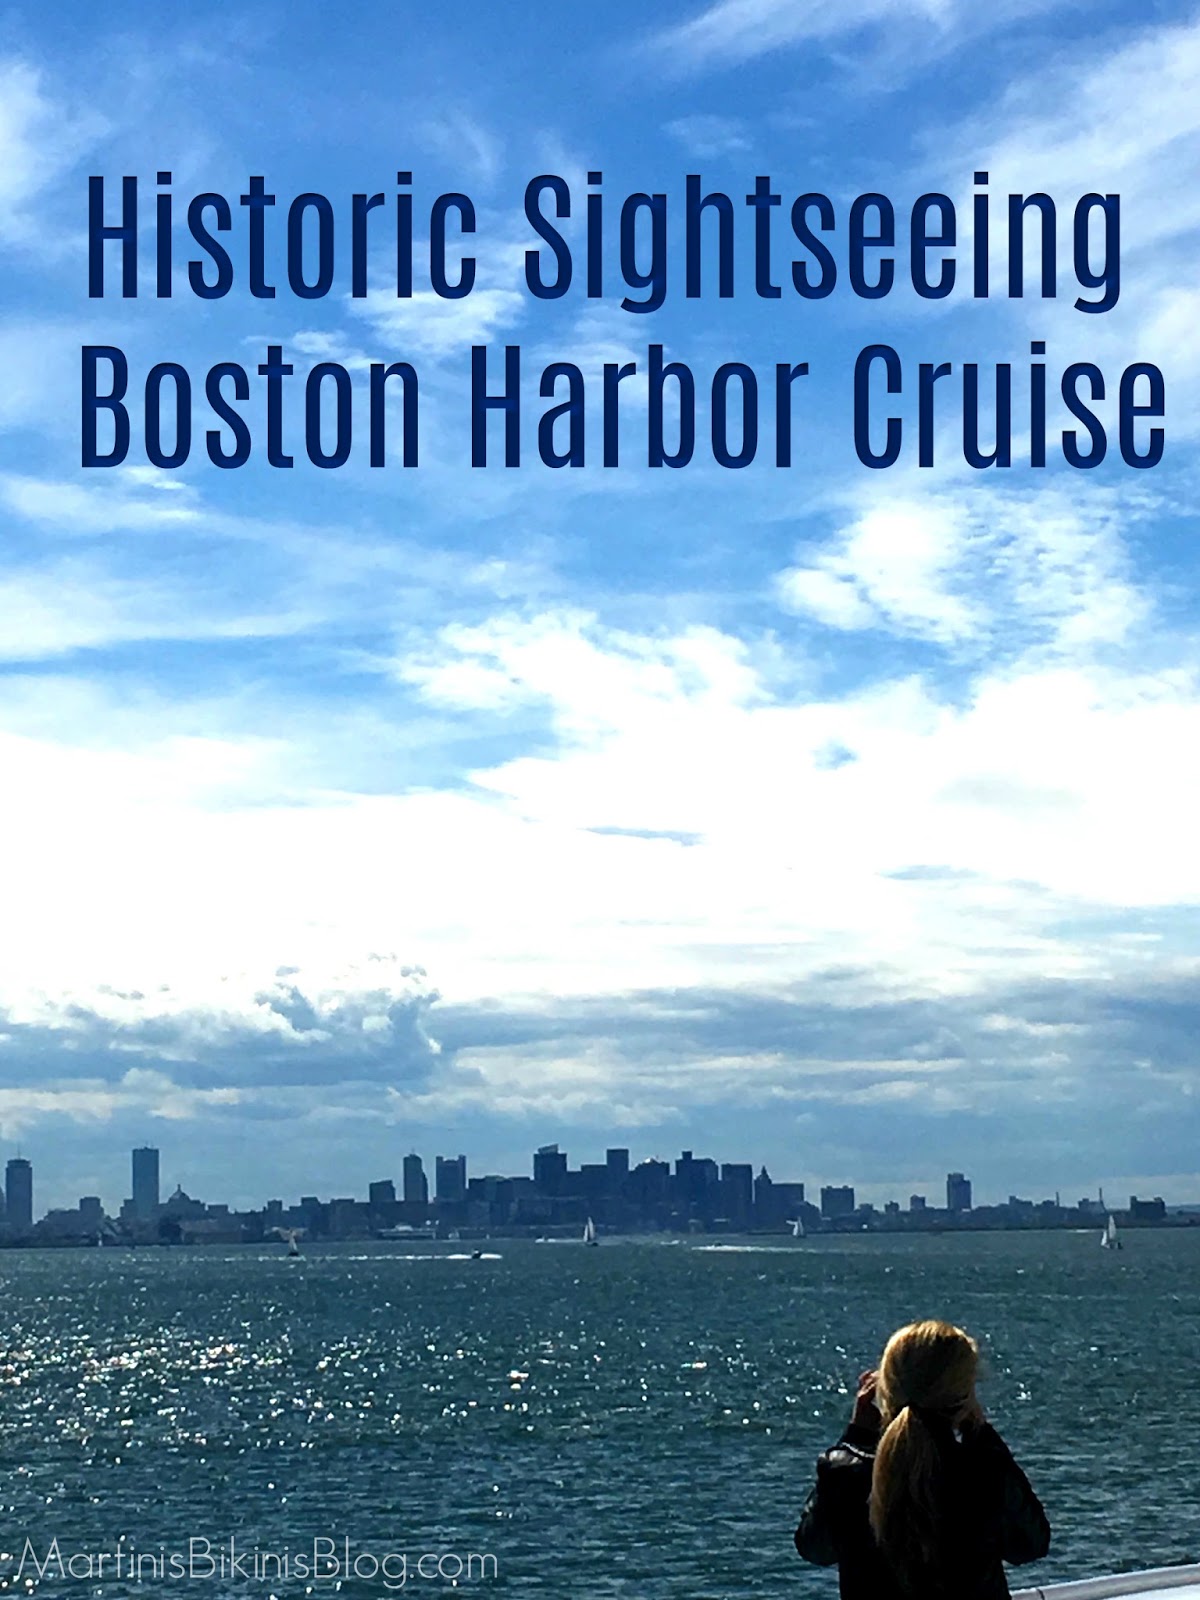 Biking, hiking and fishing expeditions when you get off the boat. Historic Sightseeing Boston Harbor Cruise Martinis Bikinis